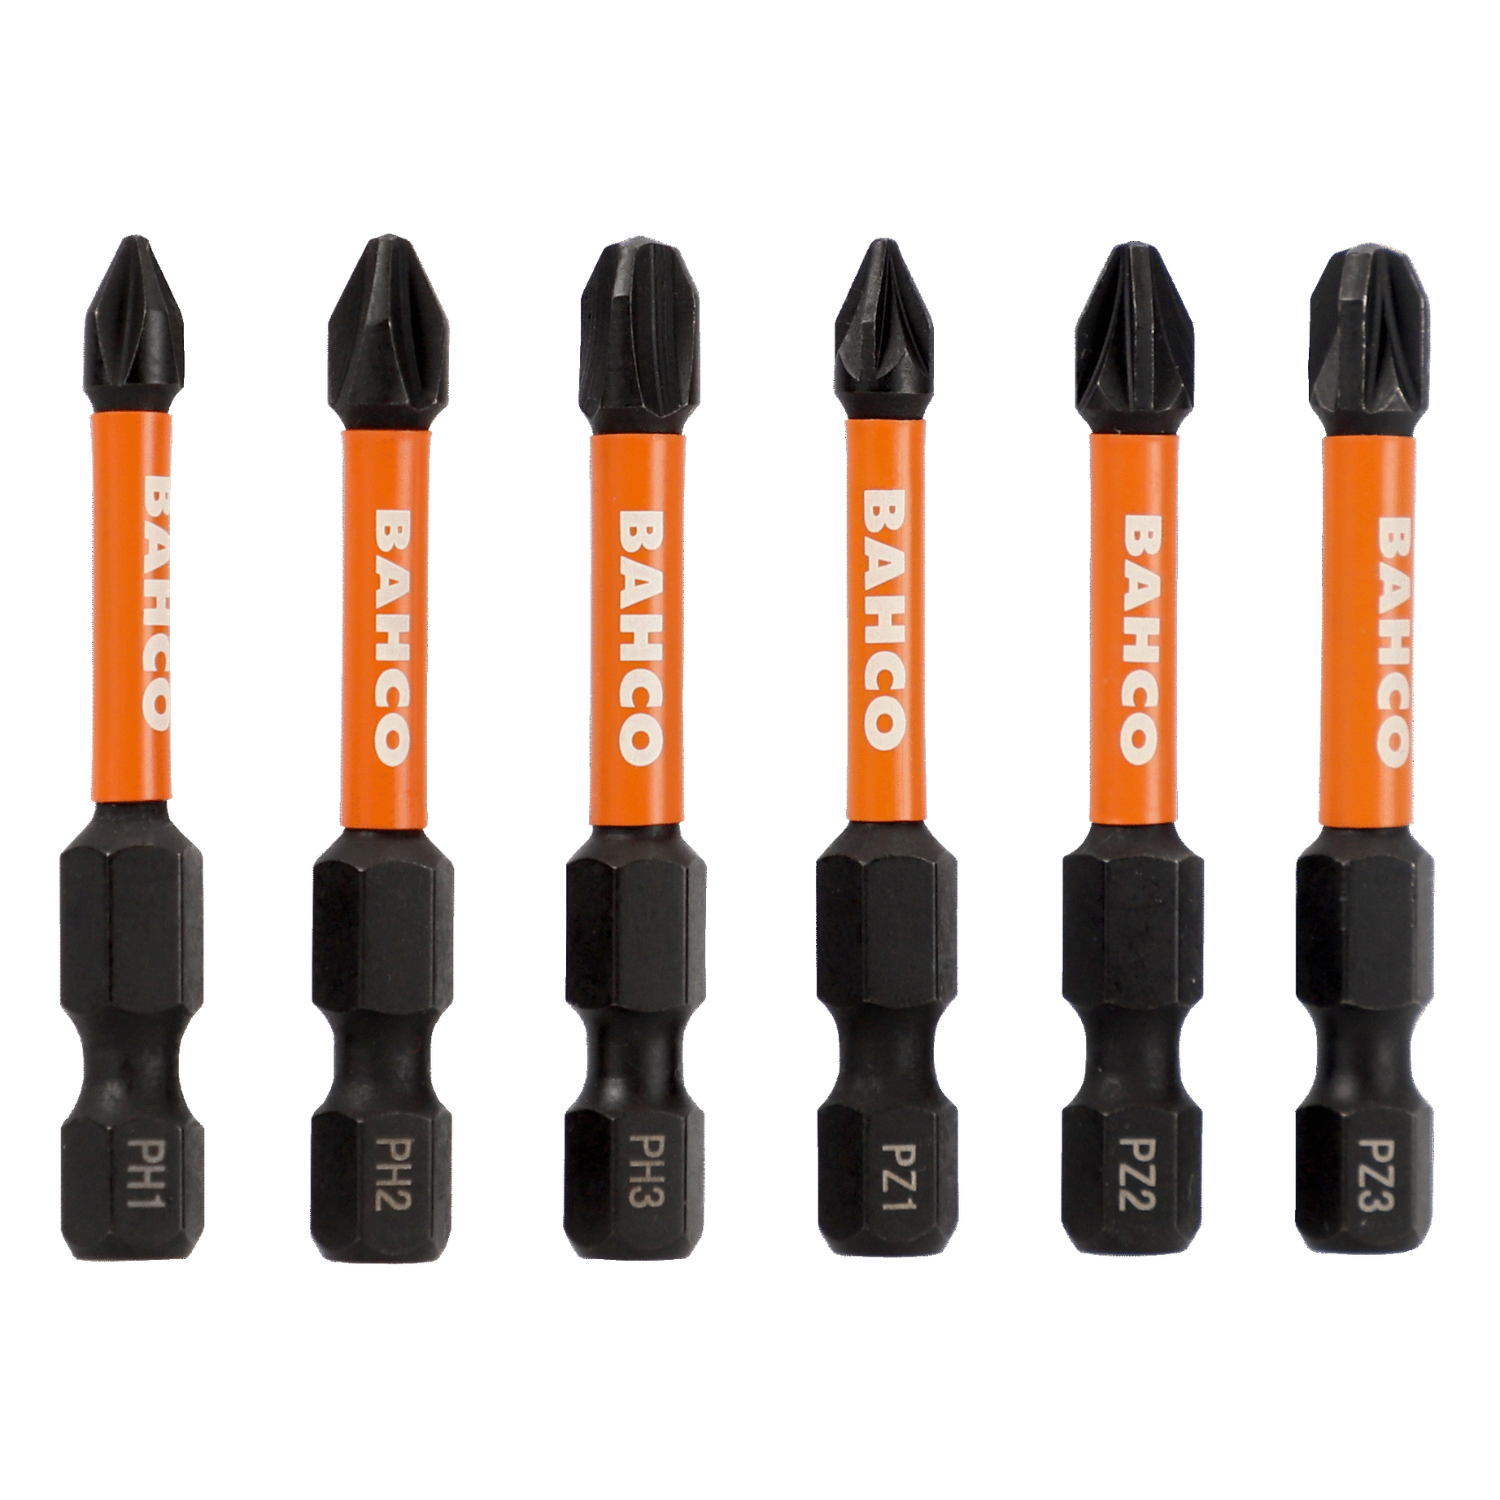 BAHCO 66IM/50PH 1/4" Heavy-Duty Torsion Screwdriver Bit - Premium Screwdriver Bit from BAHCO - Shop now at Yew Aik.